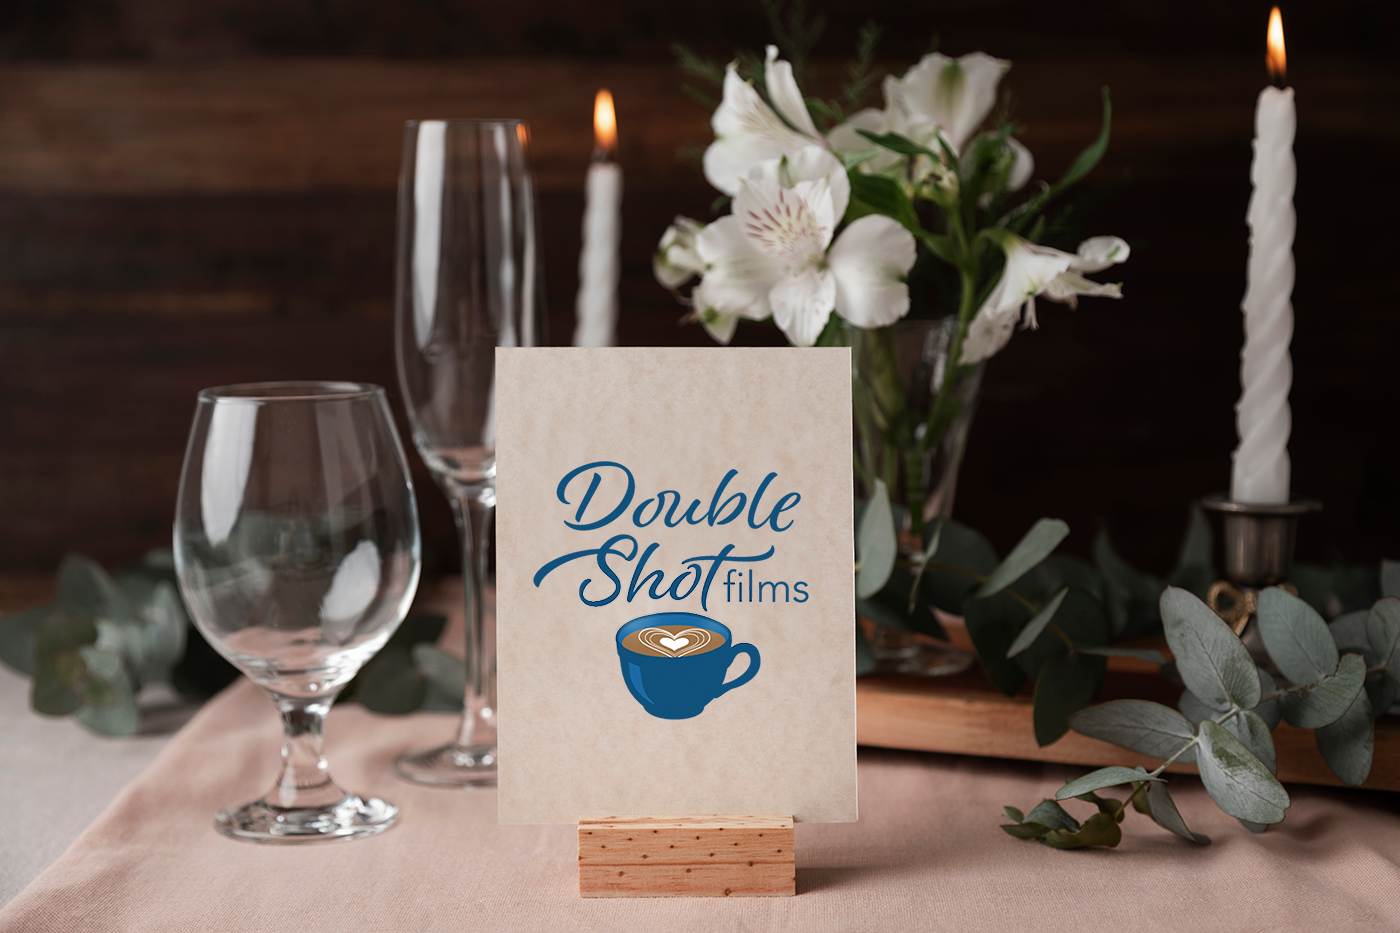 Wedding table with a sign of the Double Shot Films logo